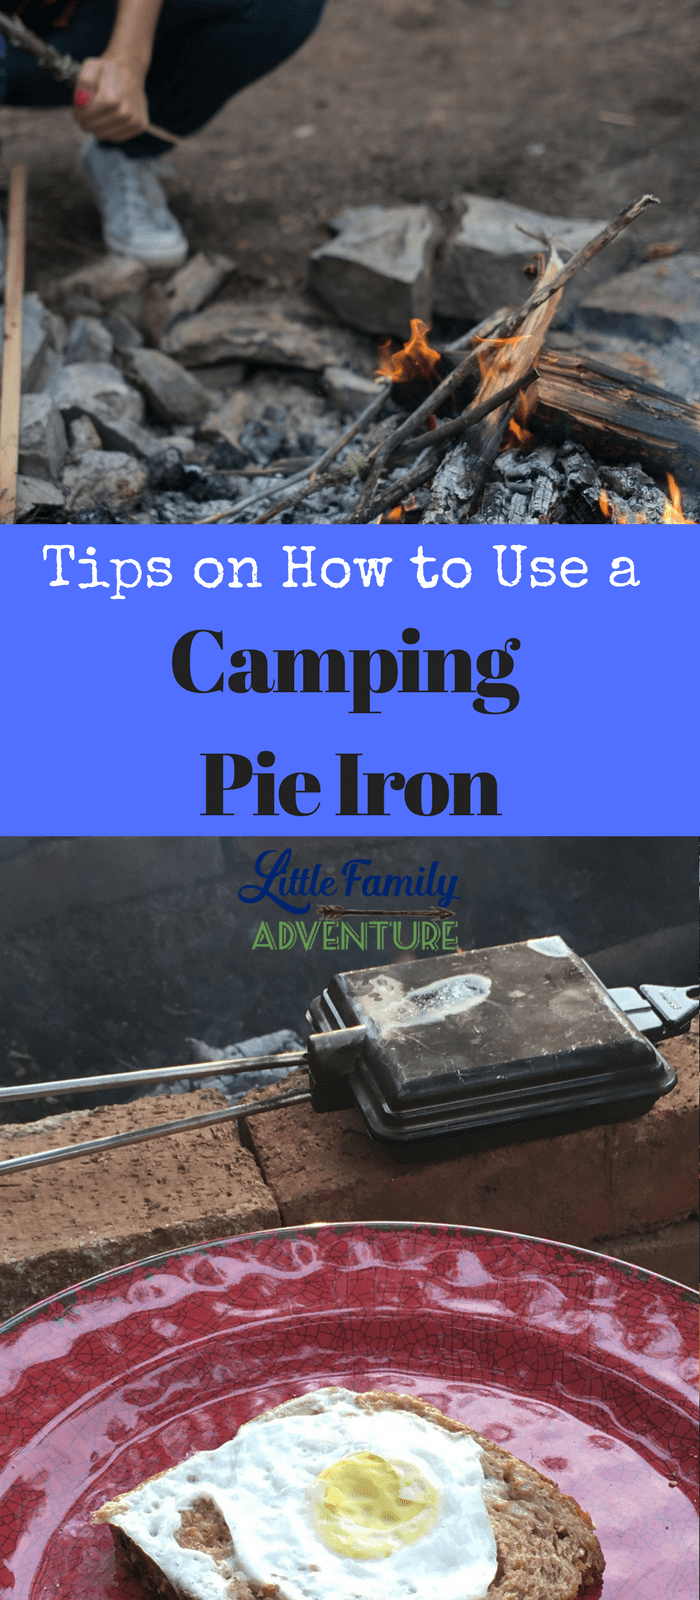 Using a Camping Pie Iron is a great way to customize camp cooking. Here are some camping cooking tips for use with a pie iron